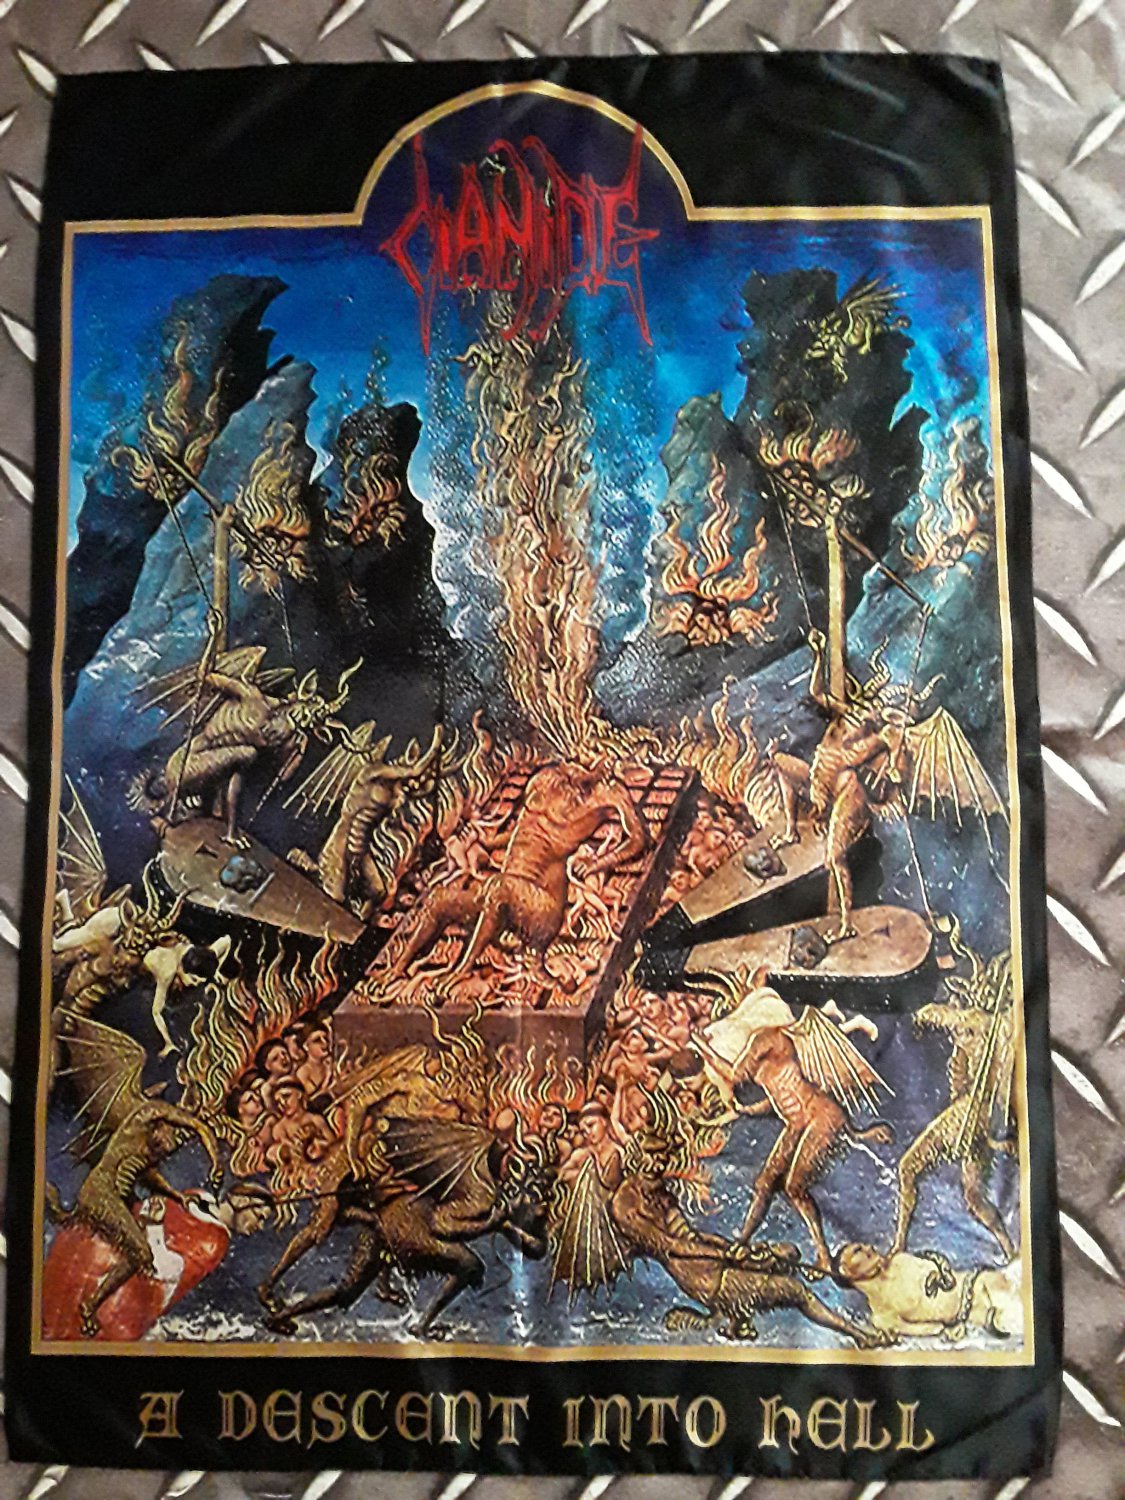 CIANIDE - A descent into hell FLAG cloth Poster Banner Thrash Death METAL